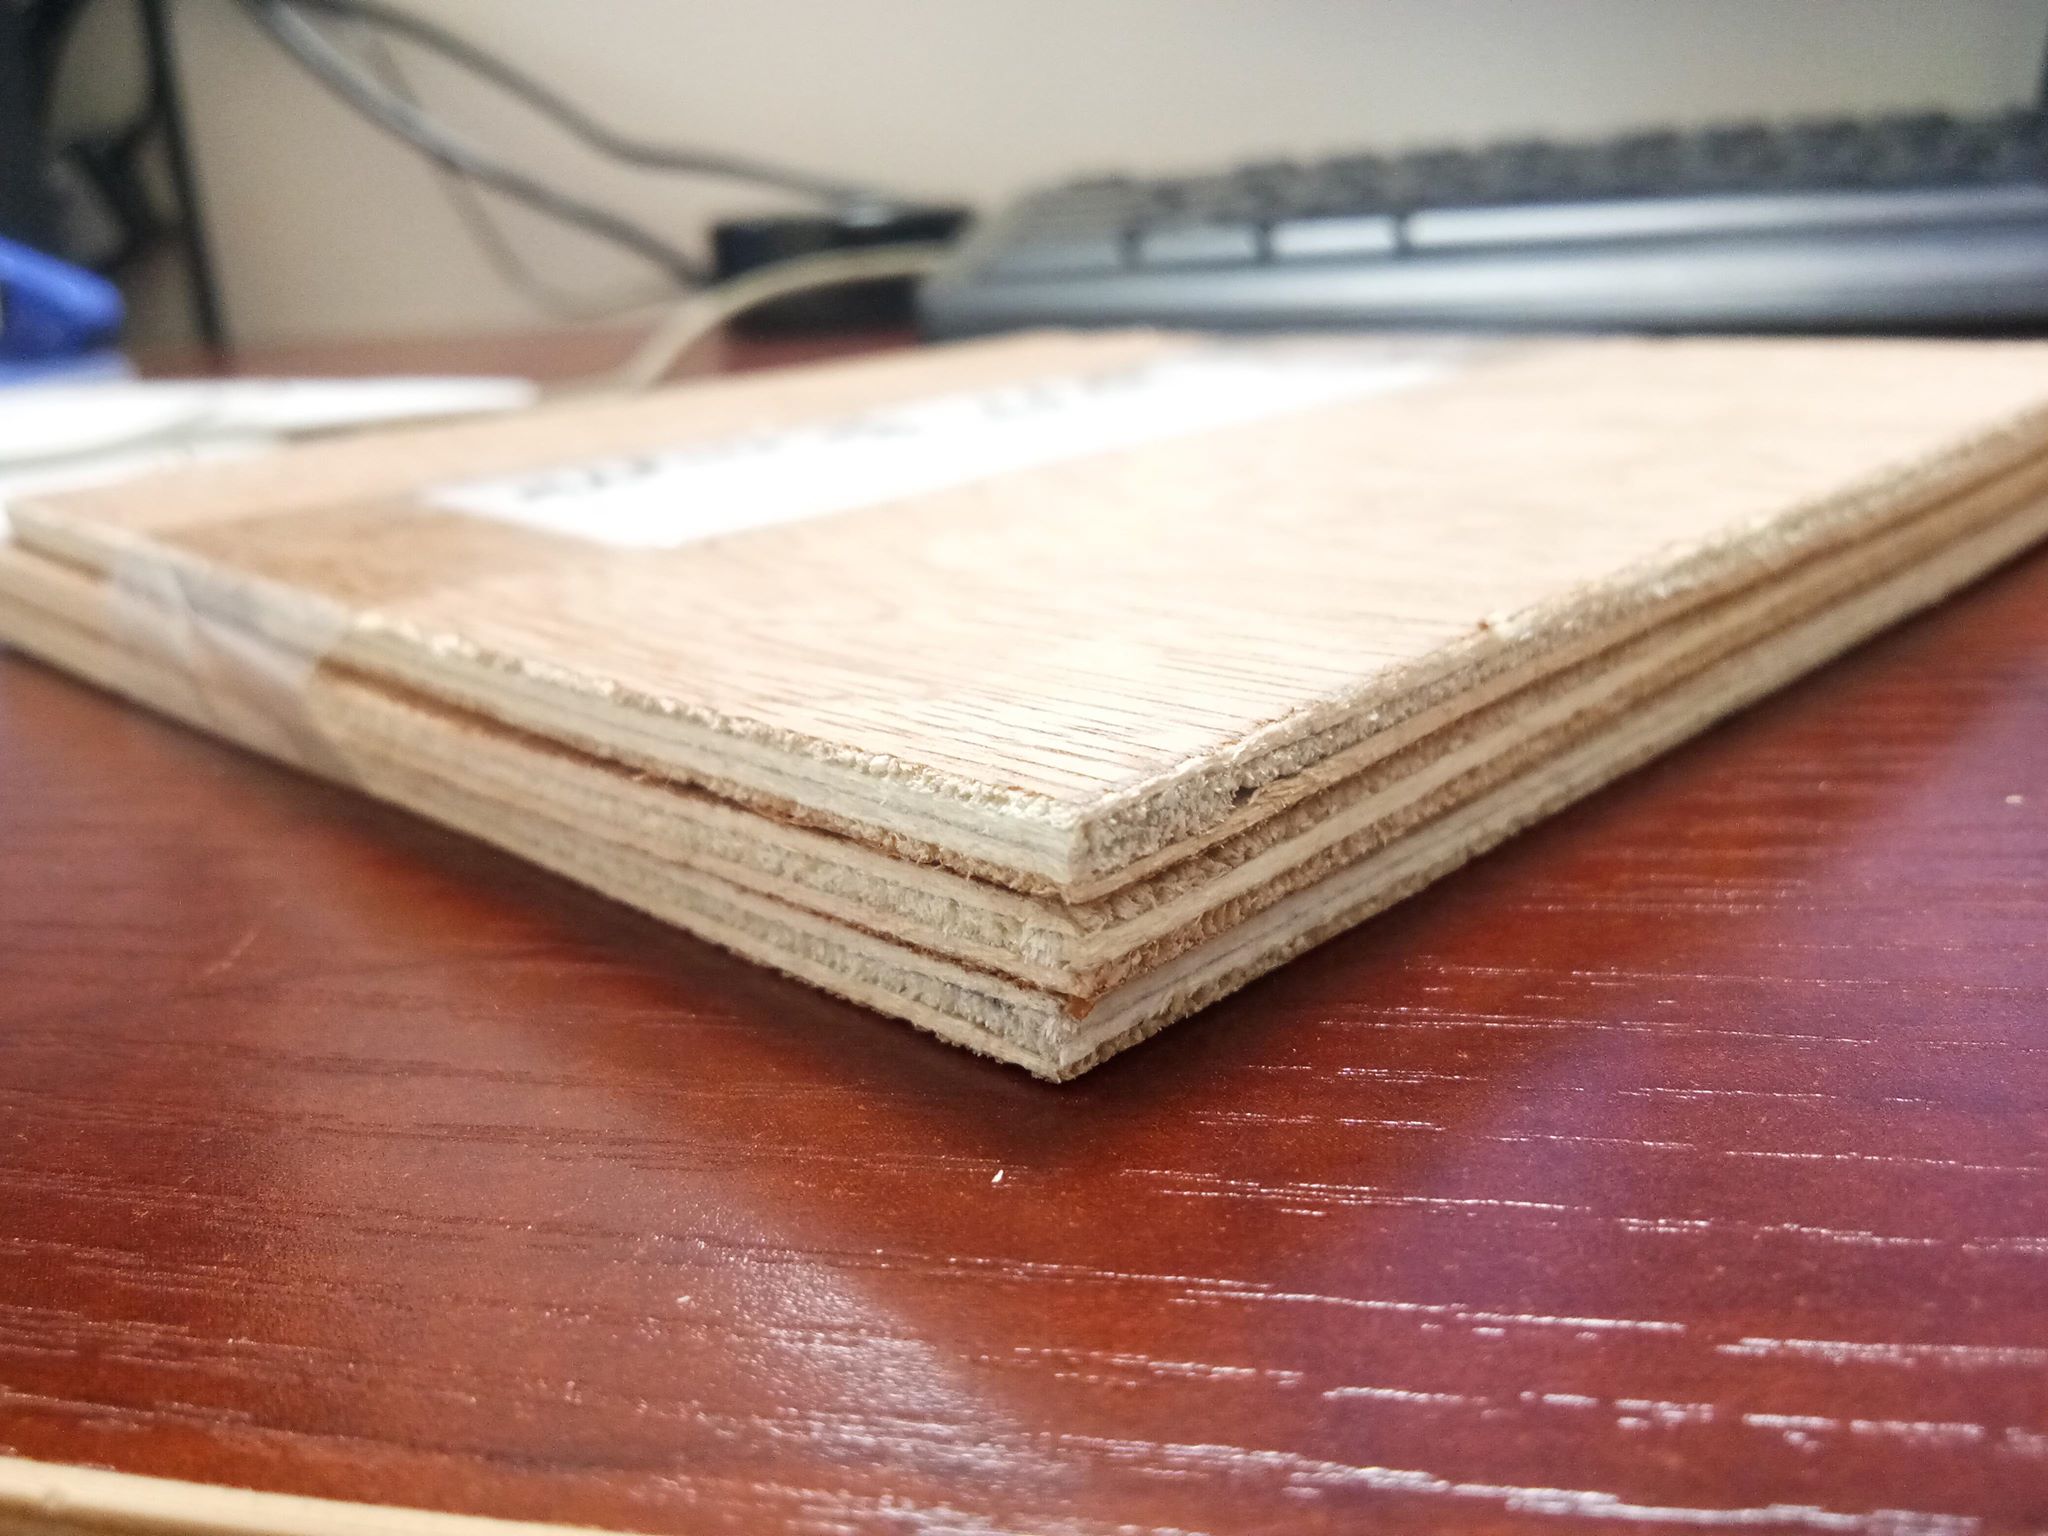 Types of Plywood